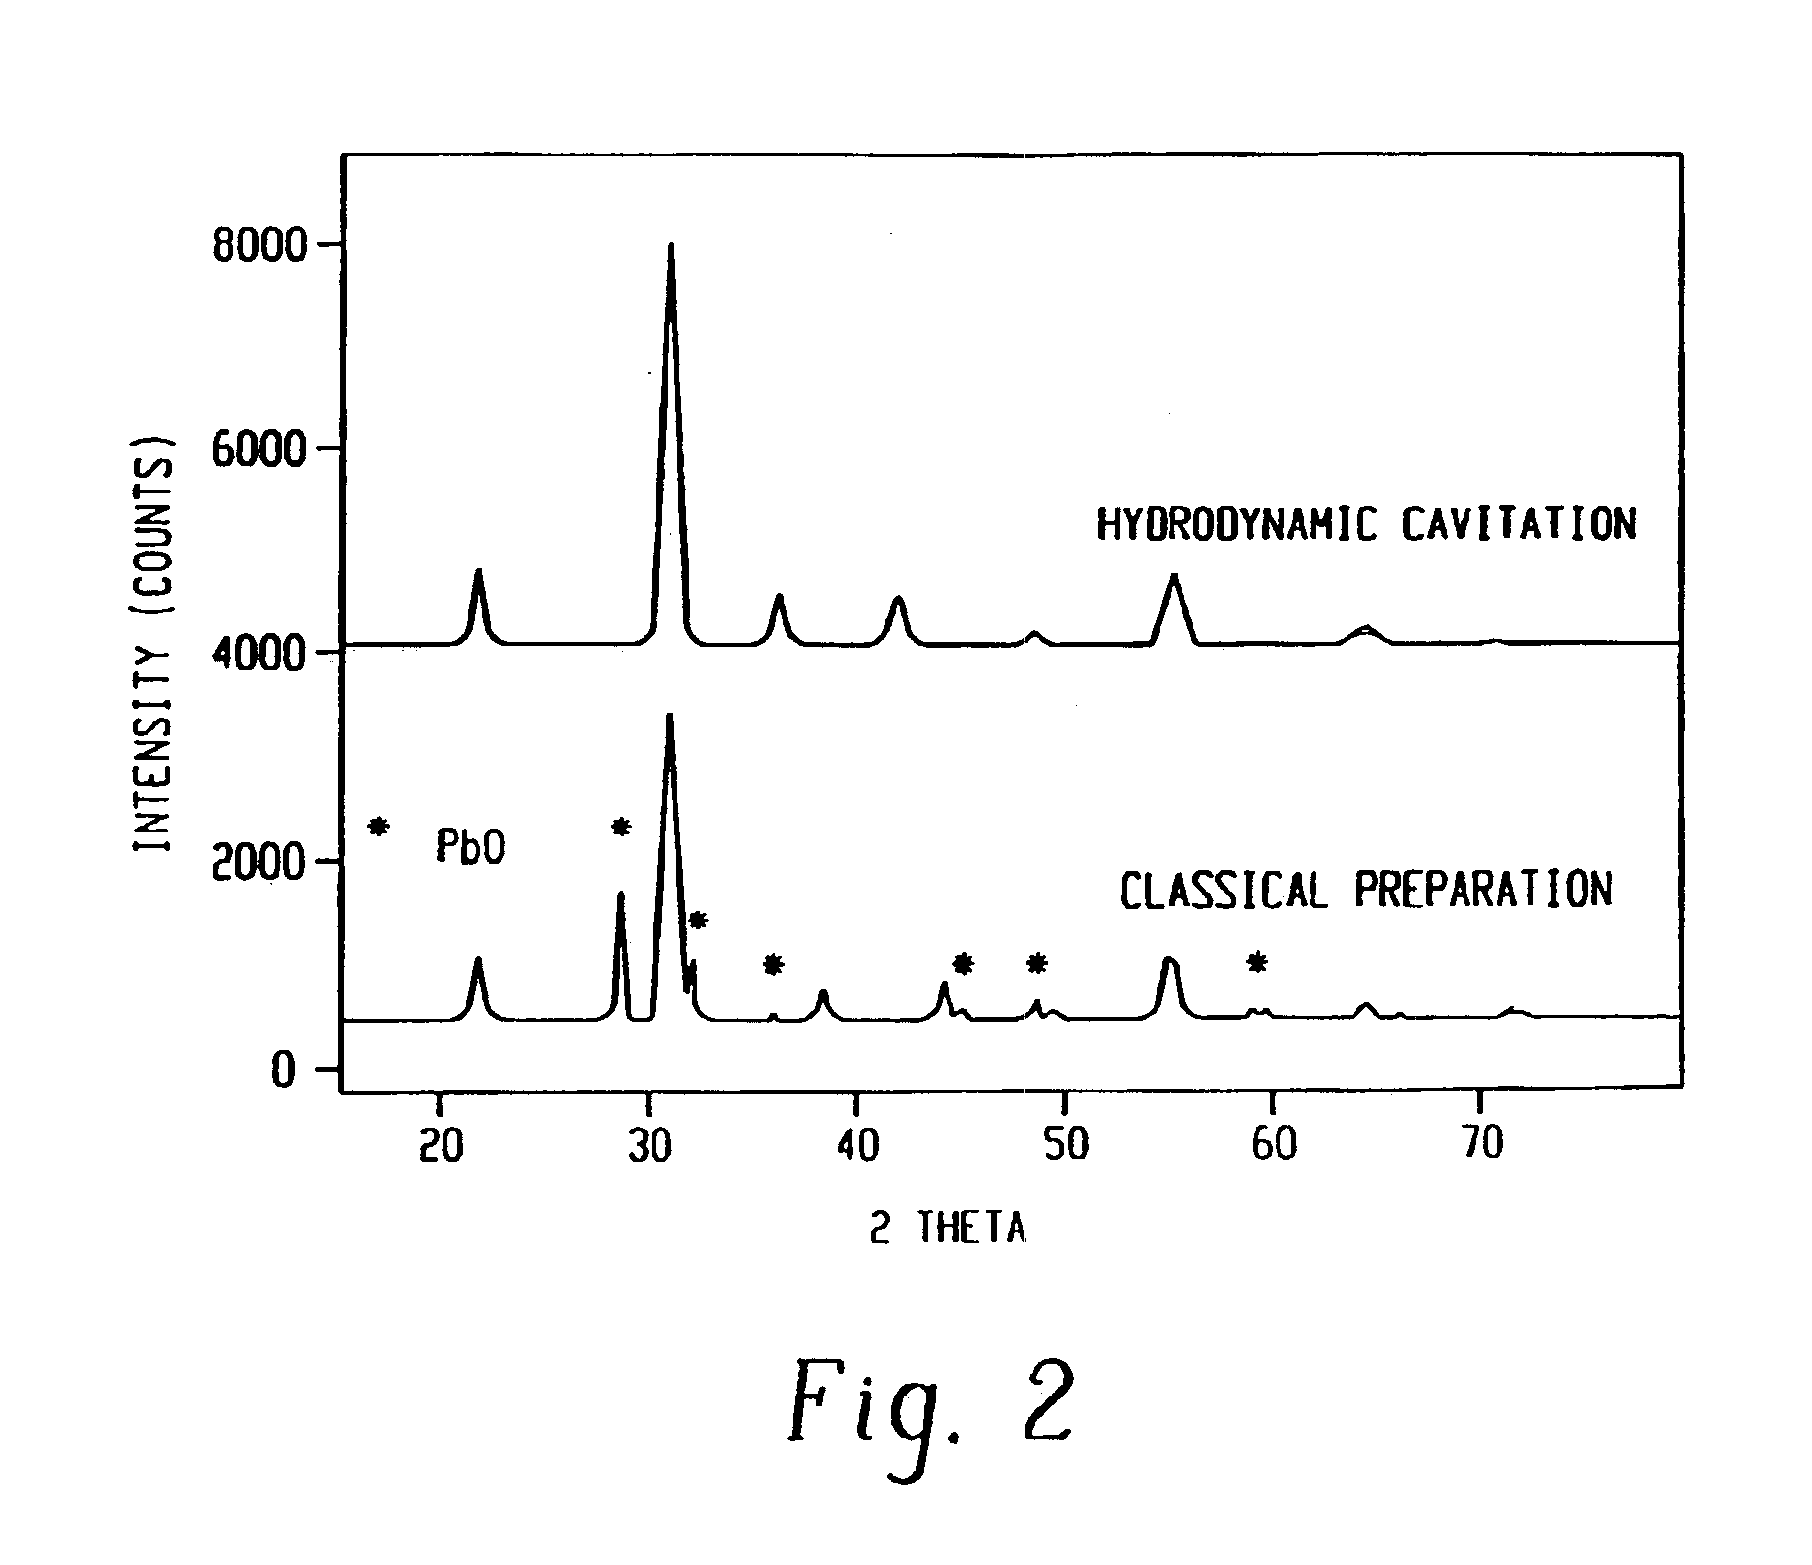 Method of preparing metal containing compounds using hydrodynamic cavitation